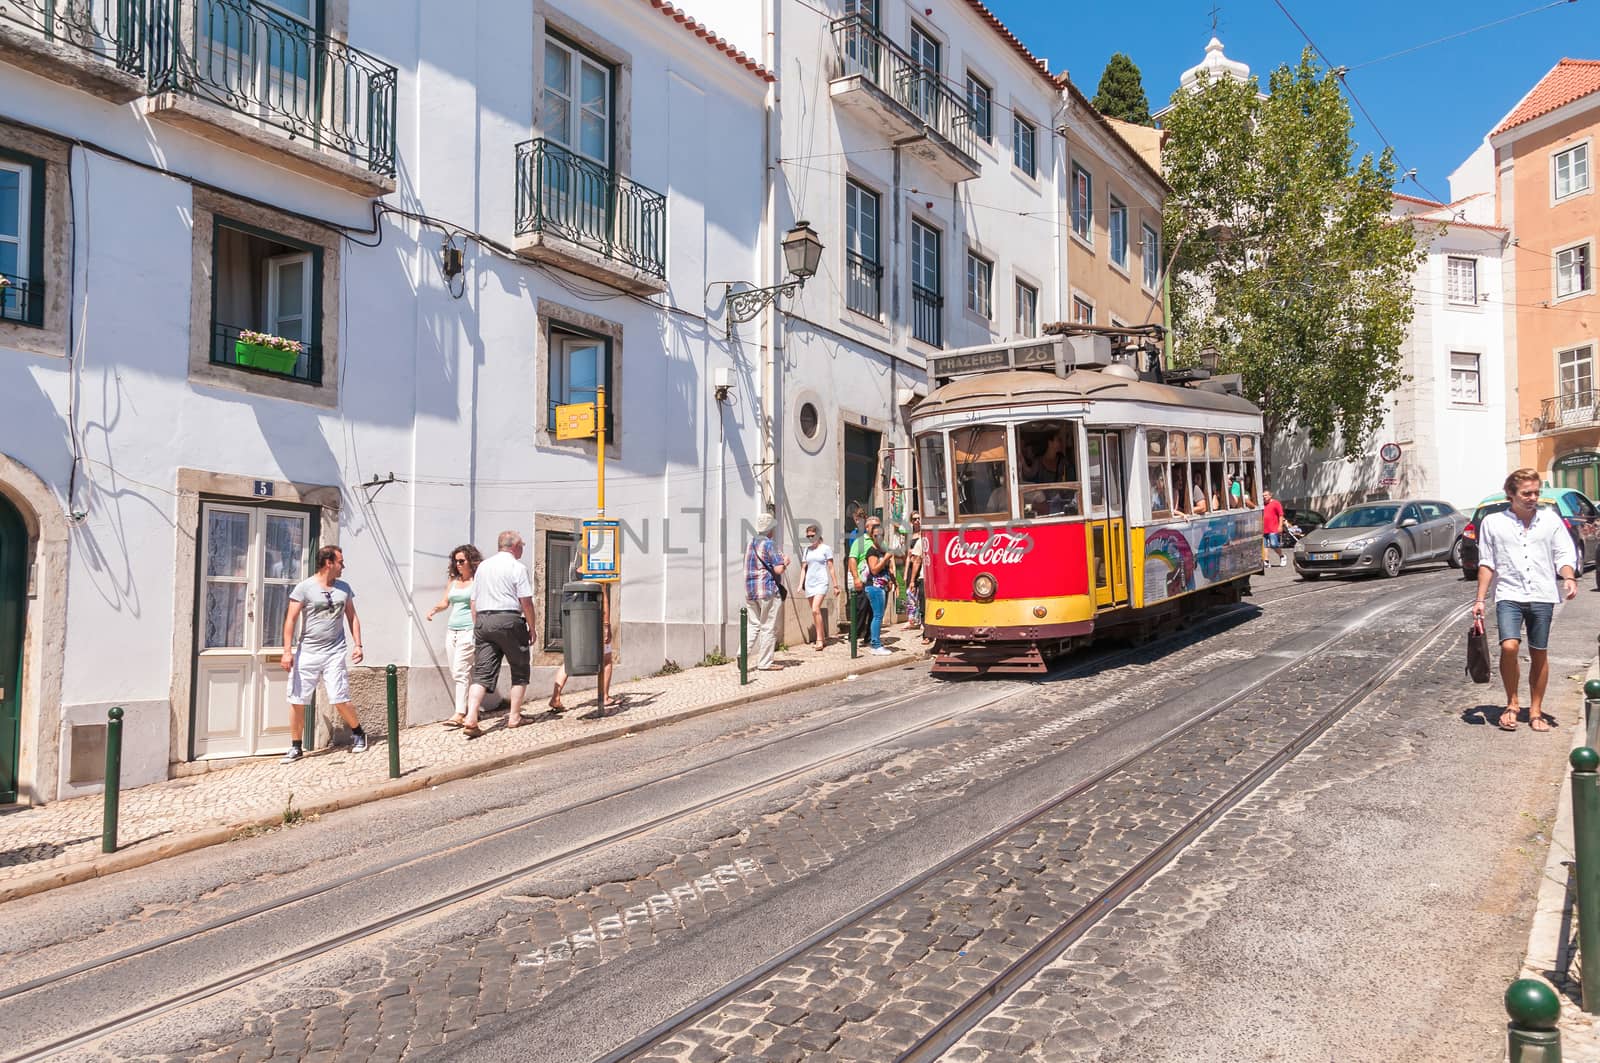 LISBON, PORTUGAL - AUGUST 23: Famous Lisbon tram number 28 on the street of Alfama district on 23 August, 2014 in Lisbon. Trams keep the traditional style of the historic center of Lisbon.